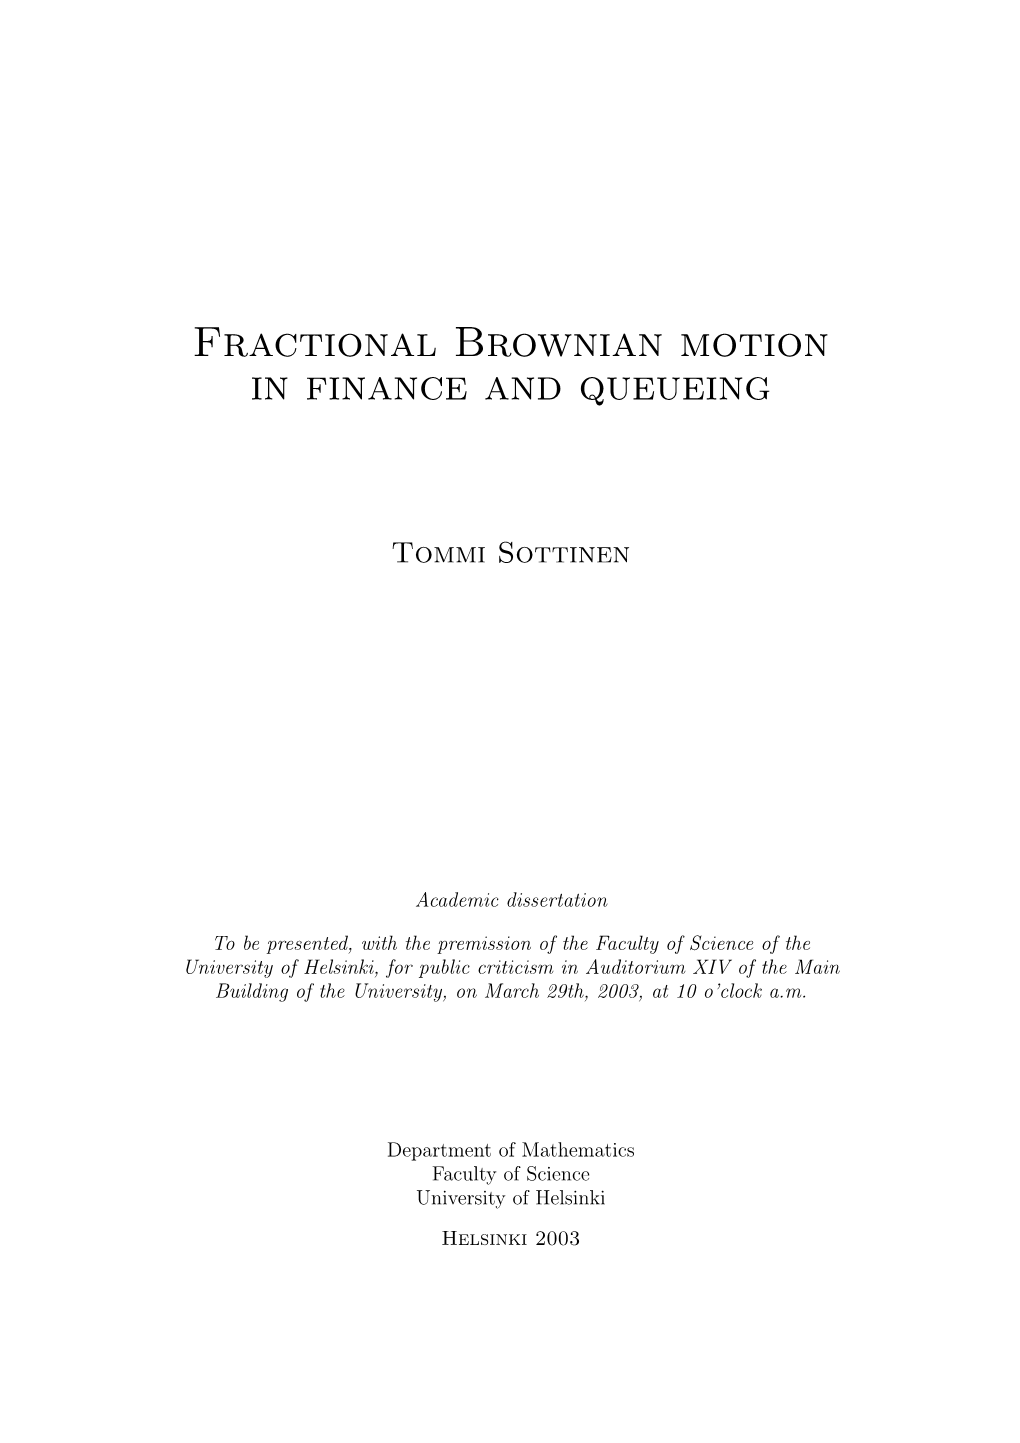 Fractional Brownian Motion in Finance and Queueing